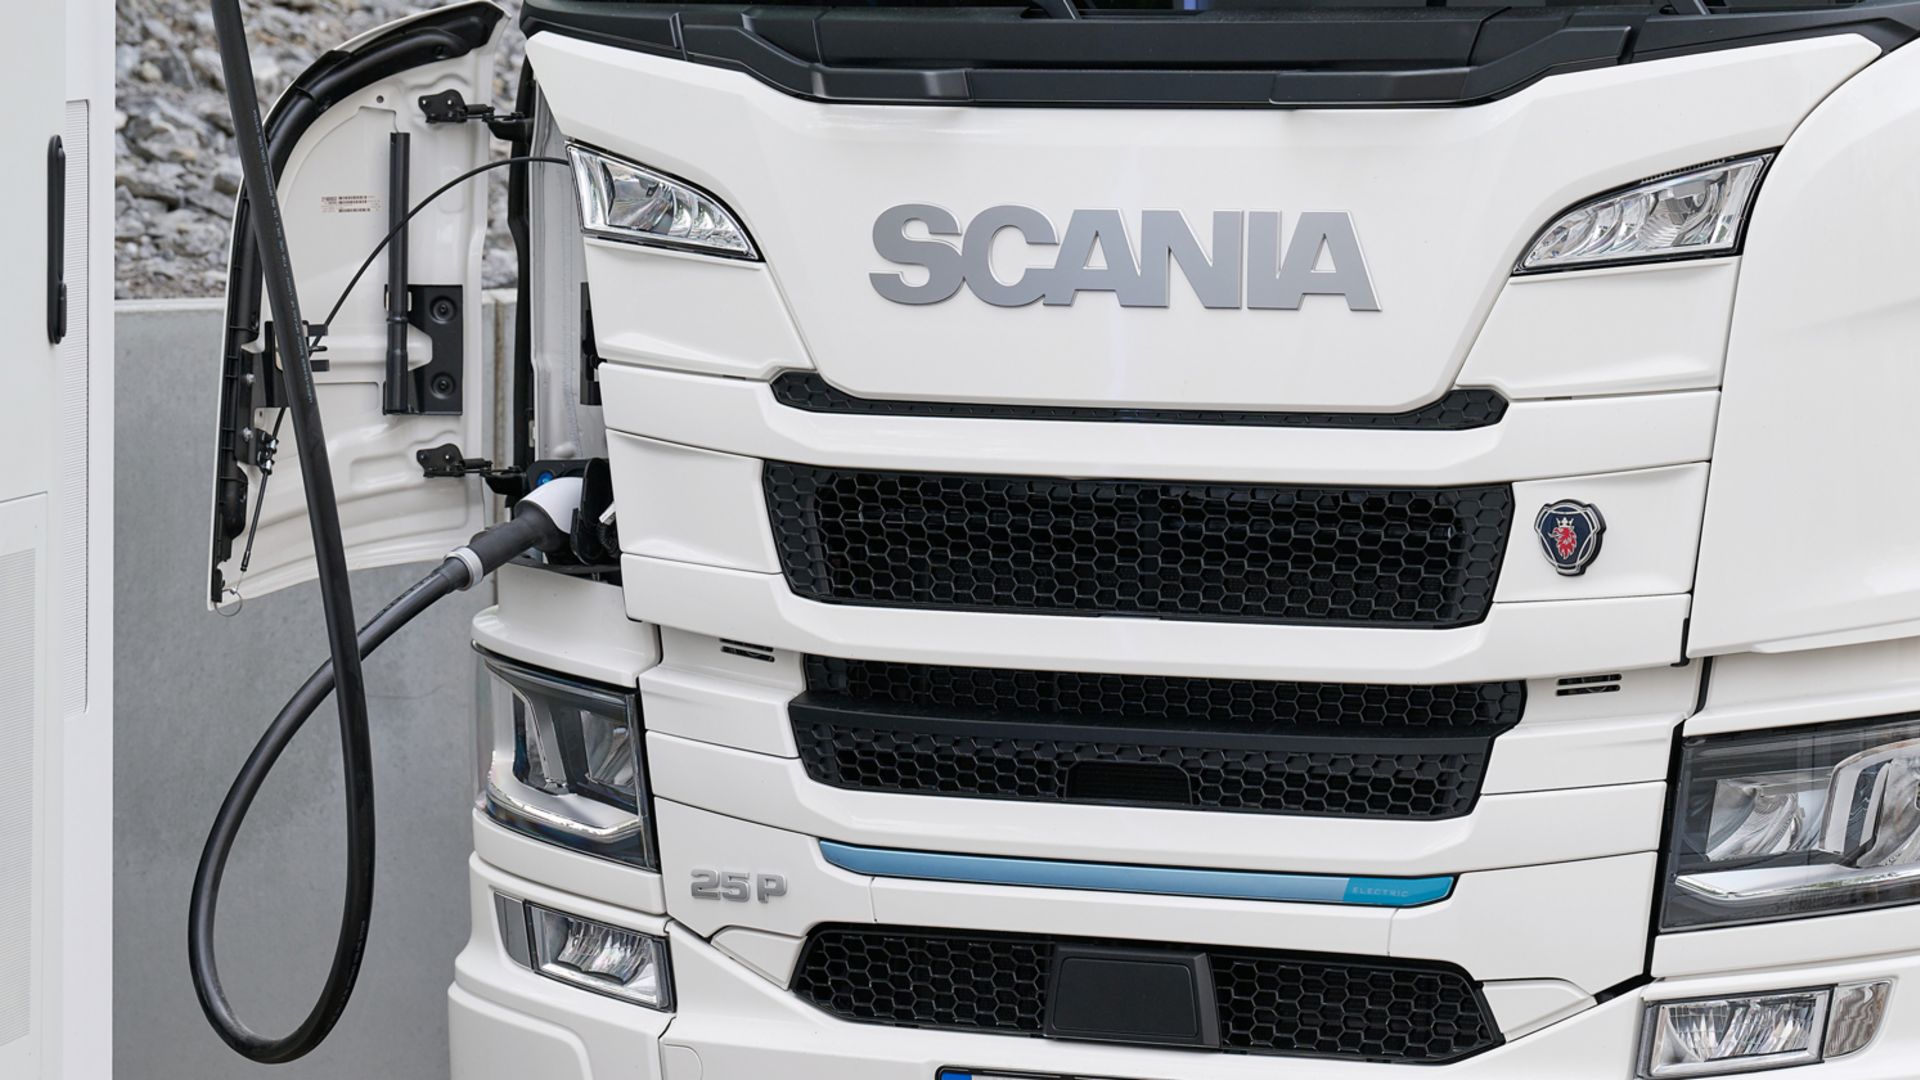 Scania issues green bond to finance further investment in electrification